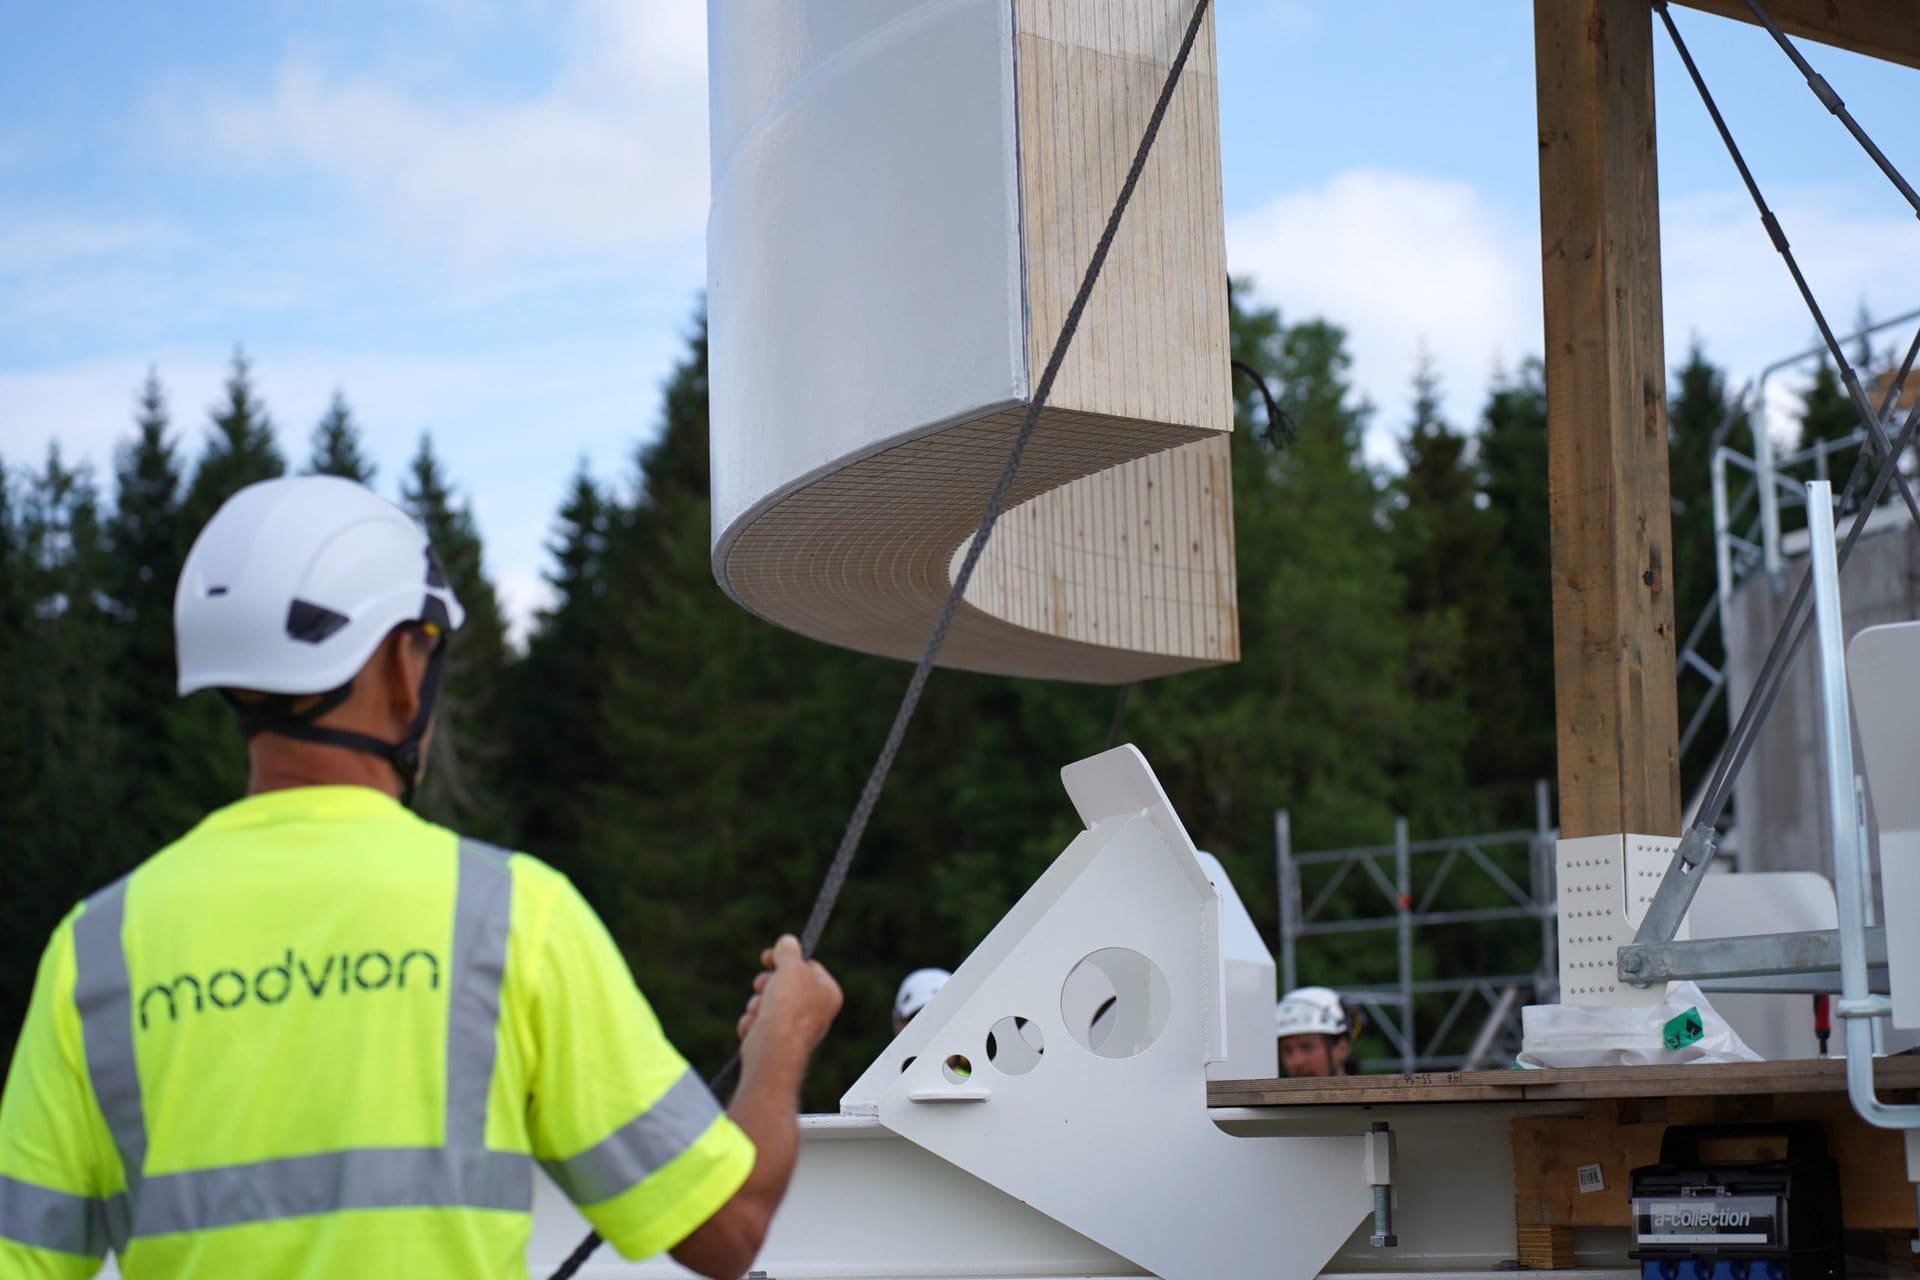 section of a wooden wind turbine tower being assembled in Sweden